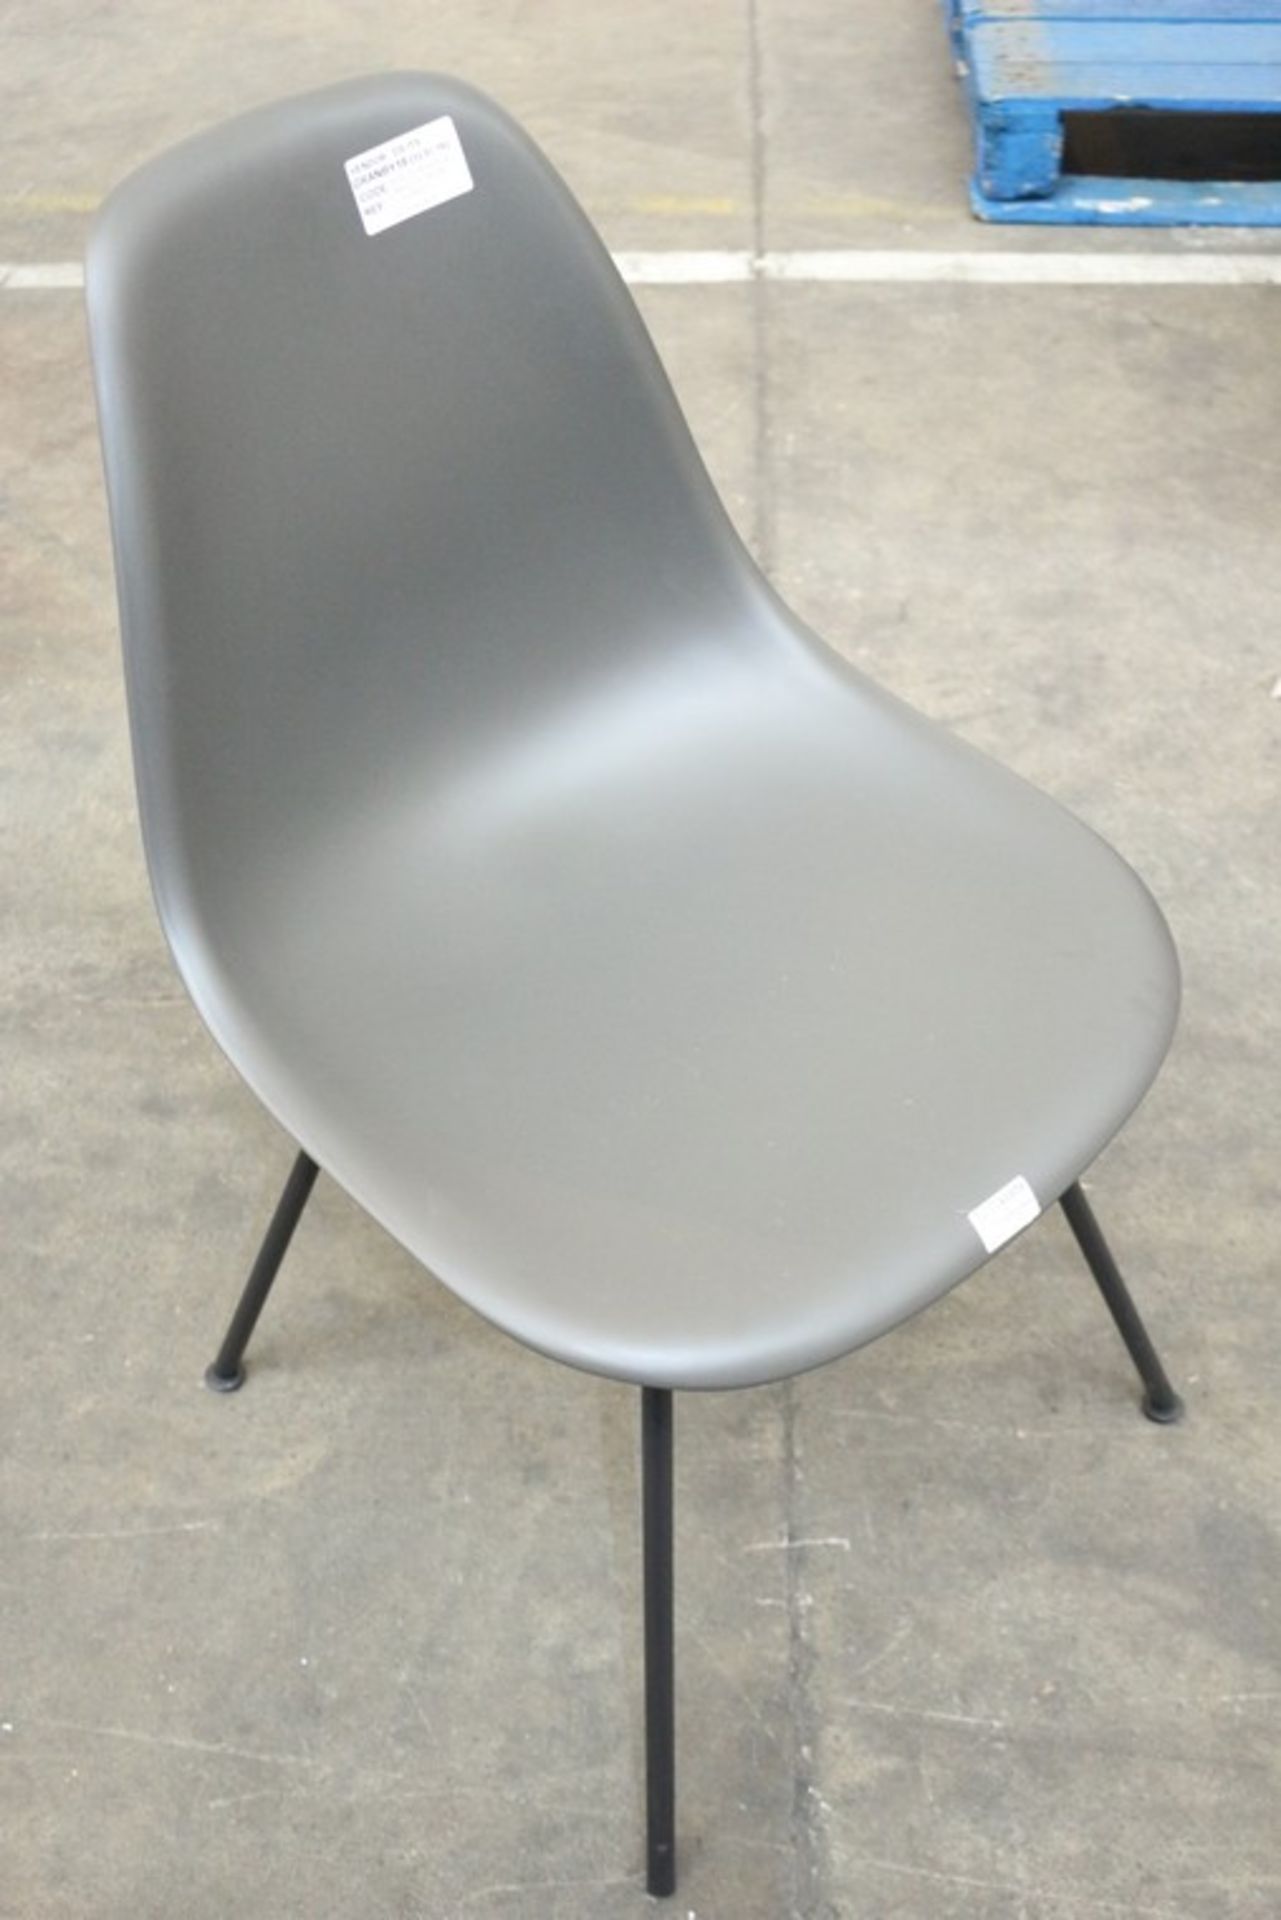 1 x EAMES DSX GREY DESIGNER PLASTIC DINING CHAIR (2228832) RRP £220 (12.7.16) *PLEASE NOTE THAT